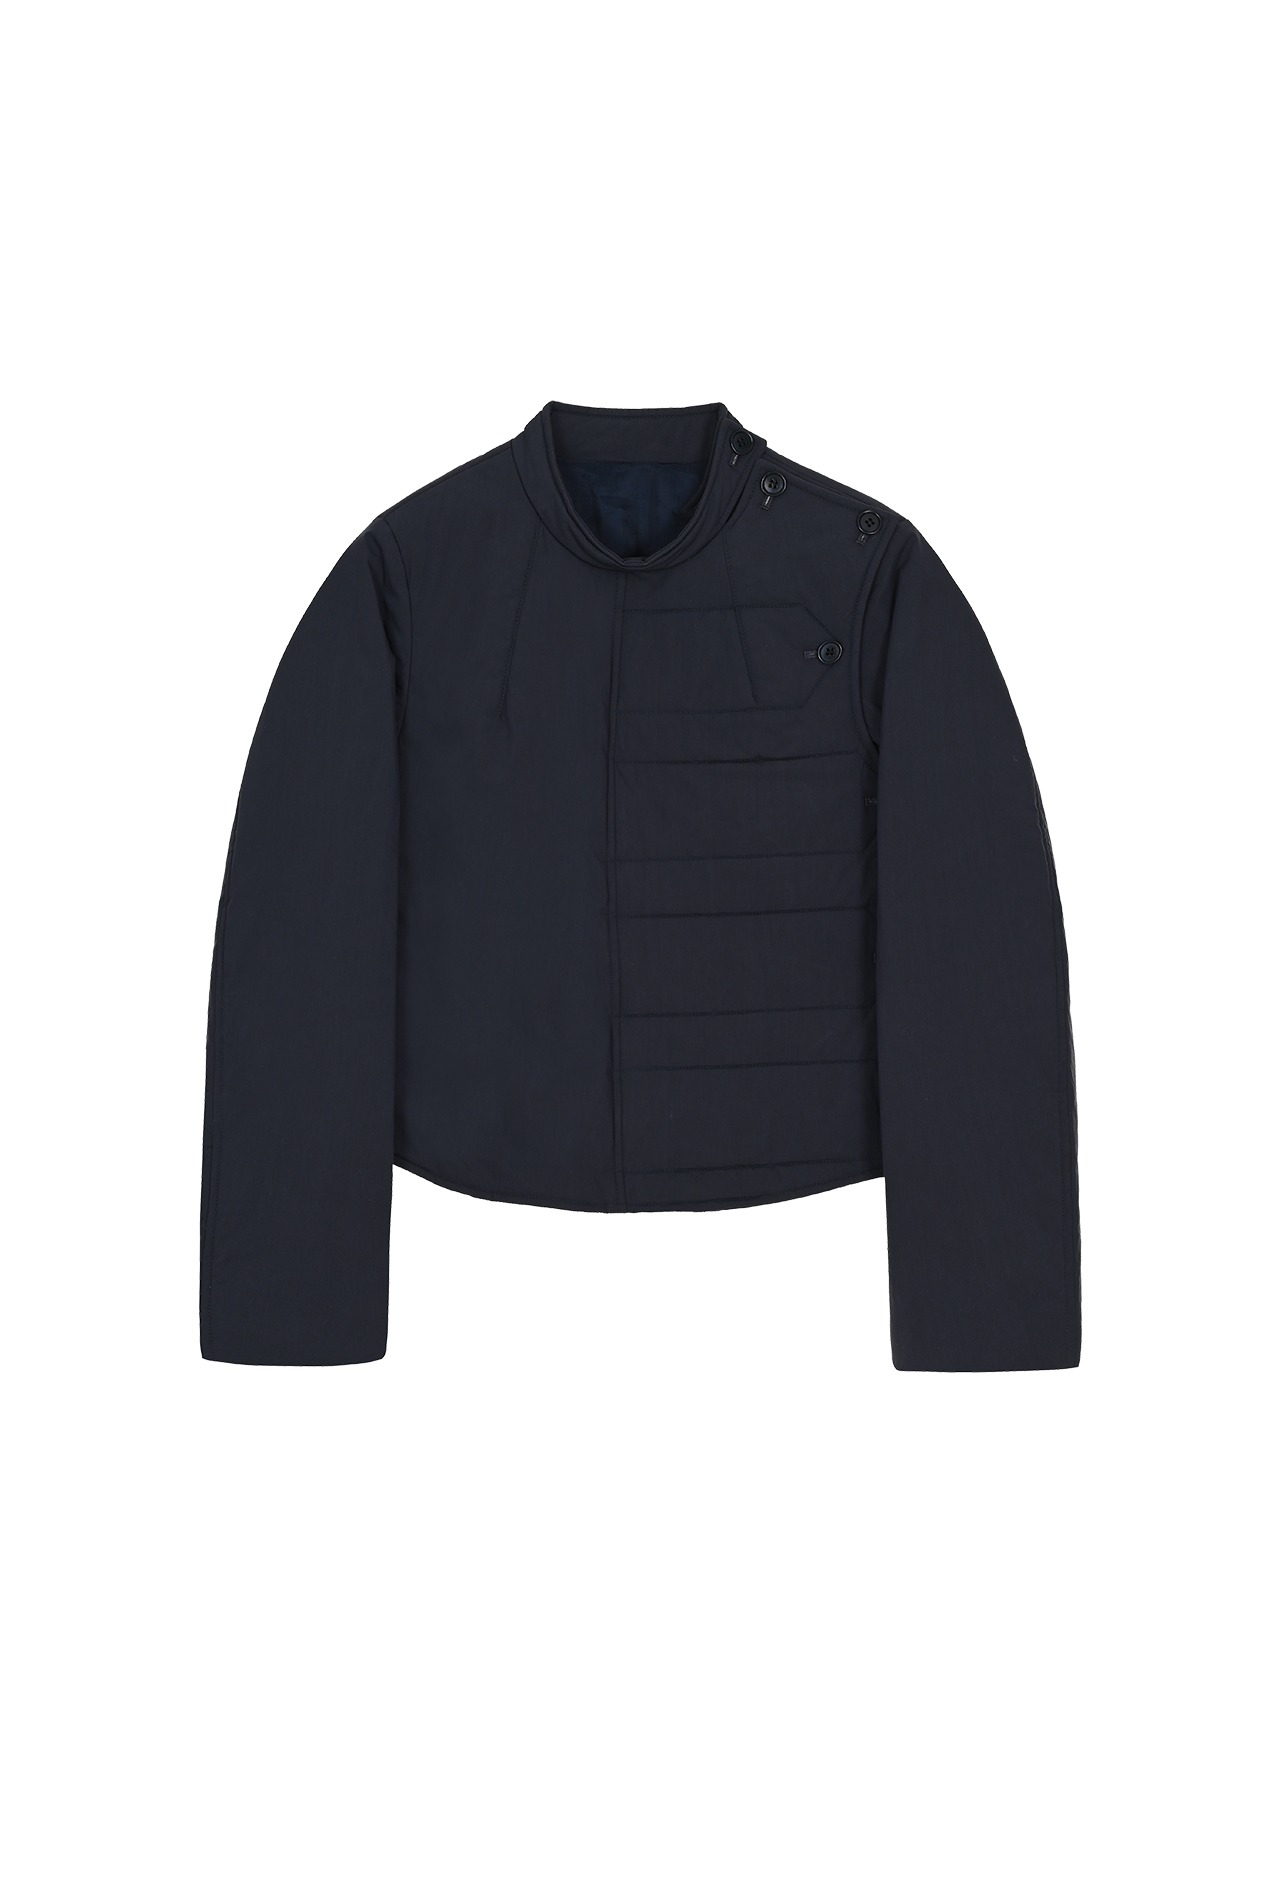 PADDED FENCING JACKET (NAVY)